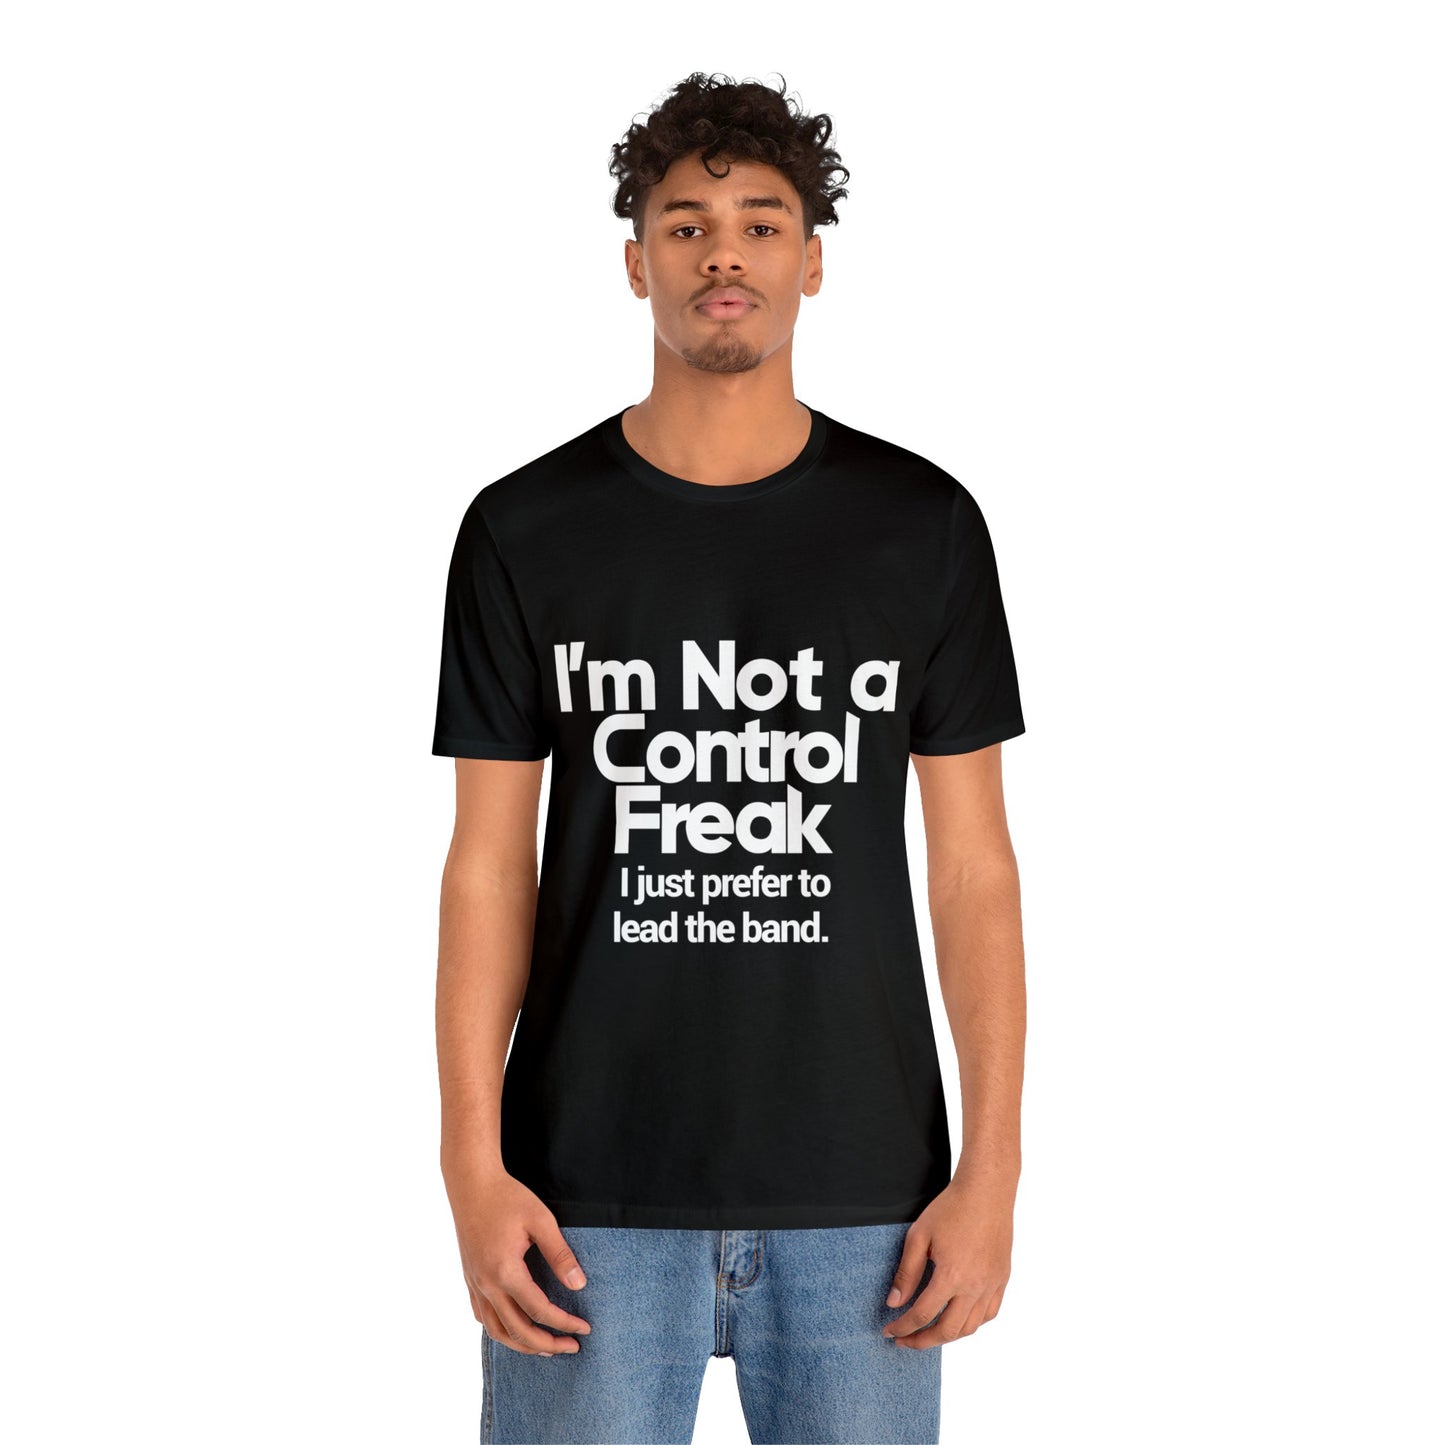 I'm not a control freak, I just prefer to lead the band - Unisex Jersey Short Sleeve Tee